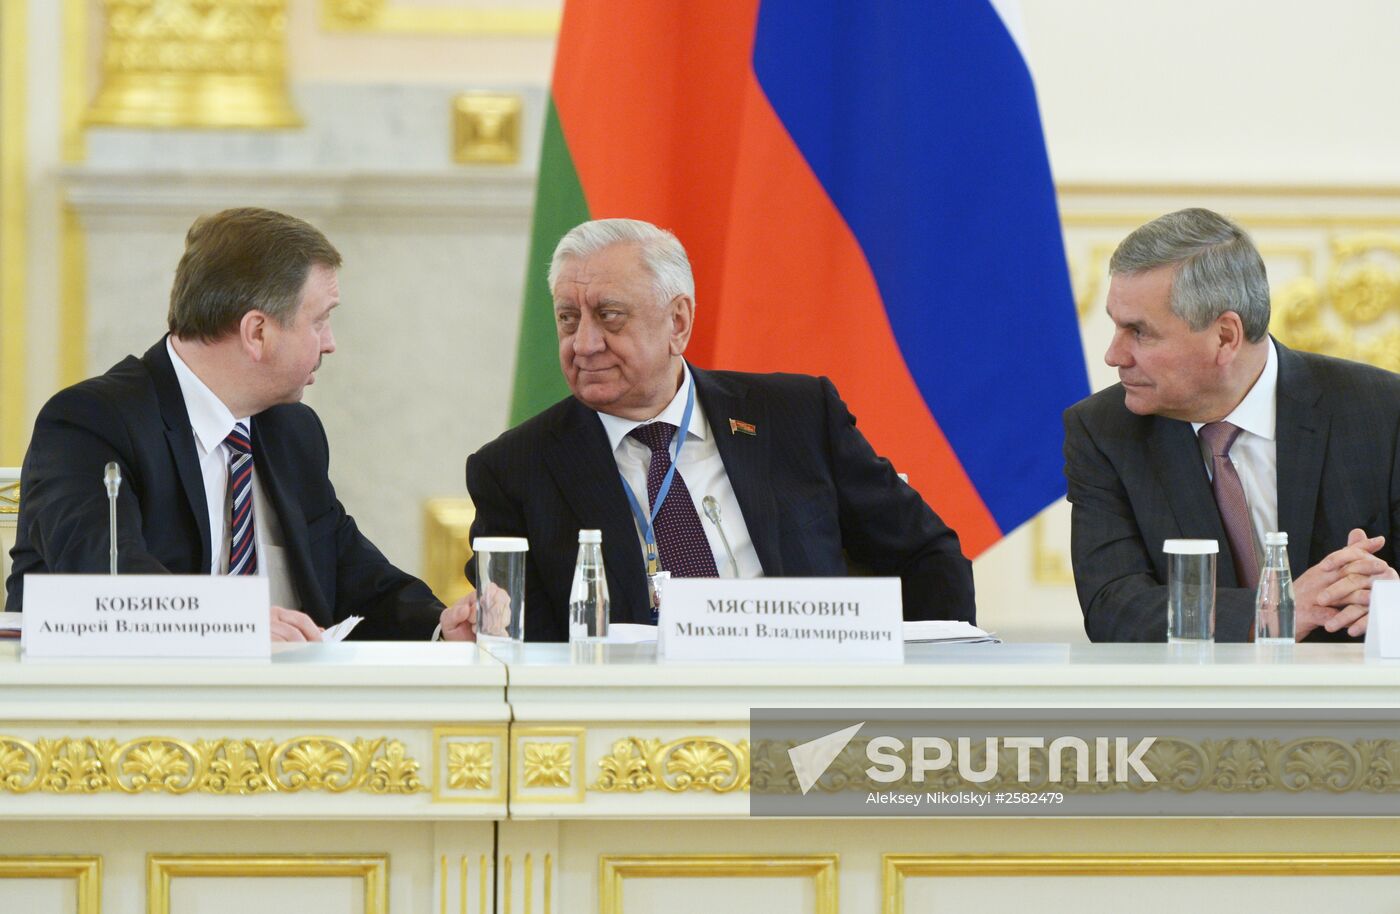 Meeting of Supreme State Council of Union State of Russia and Belarus in Moscow